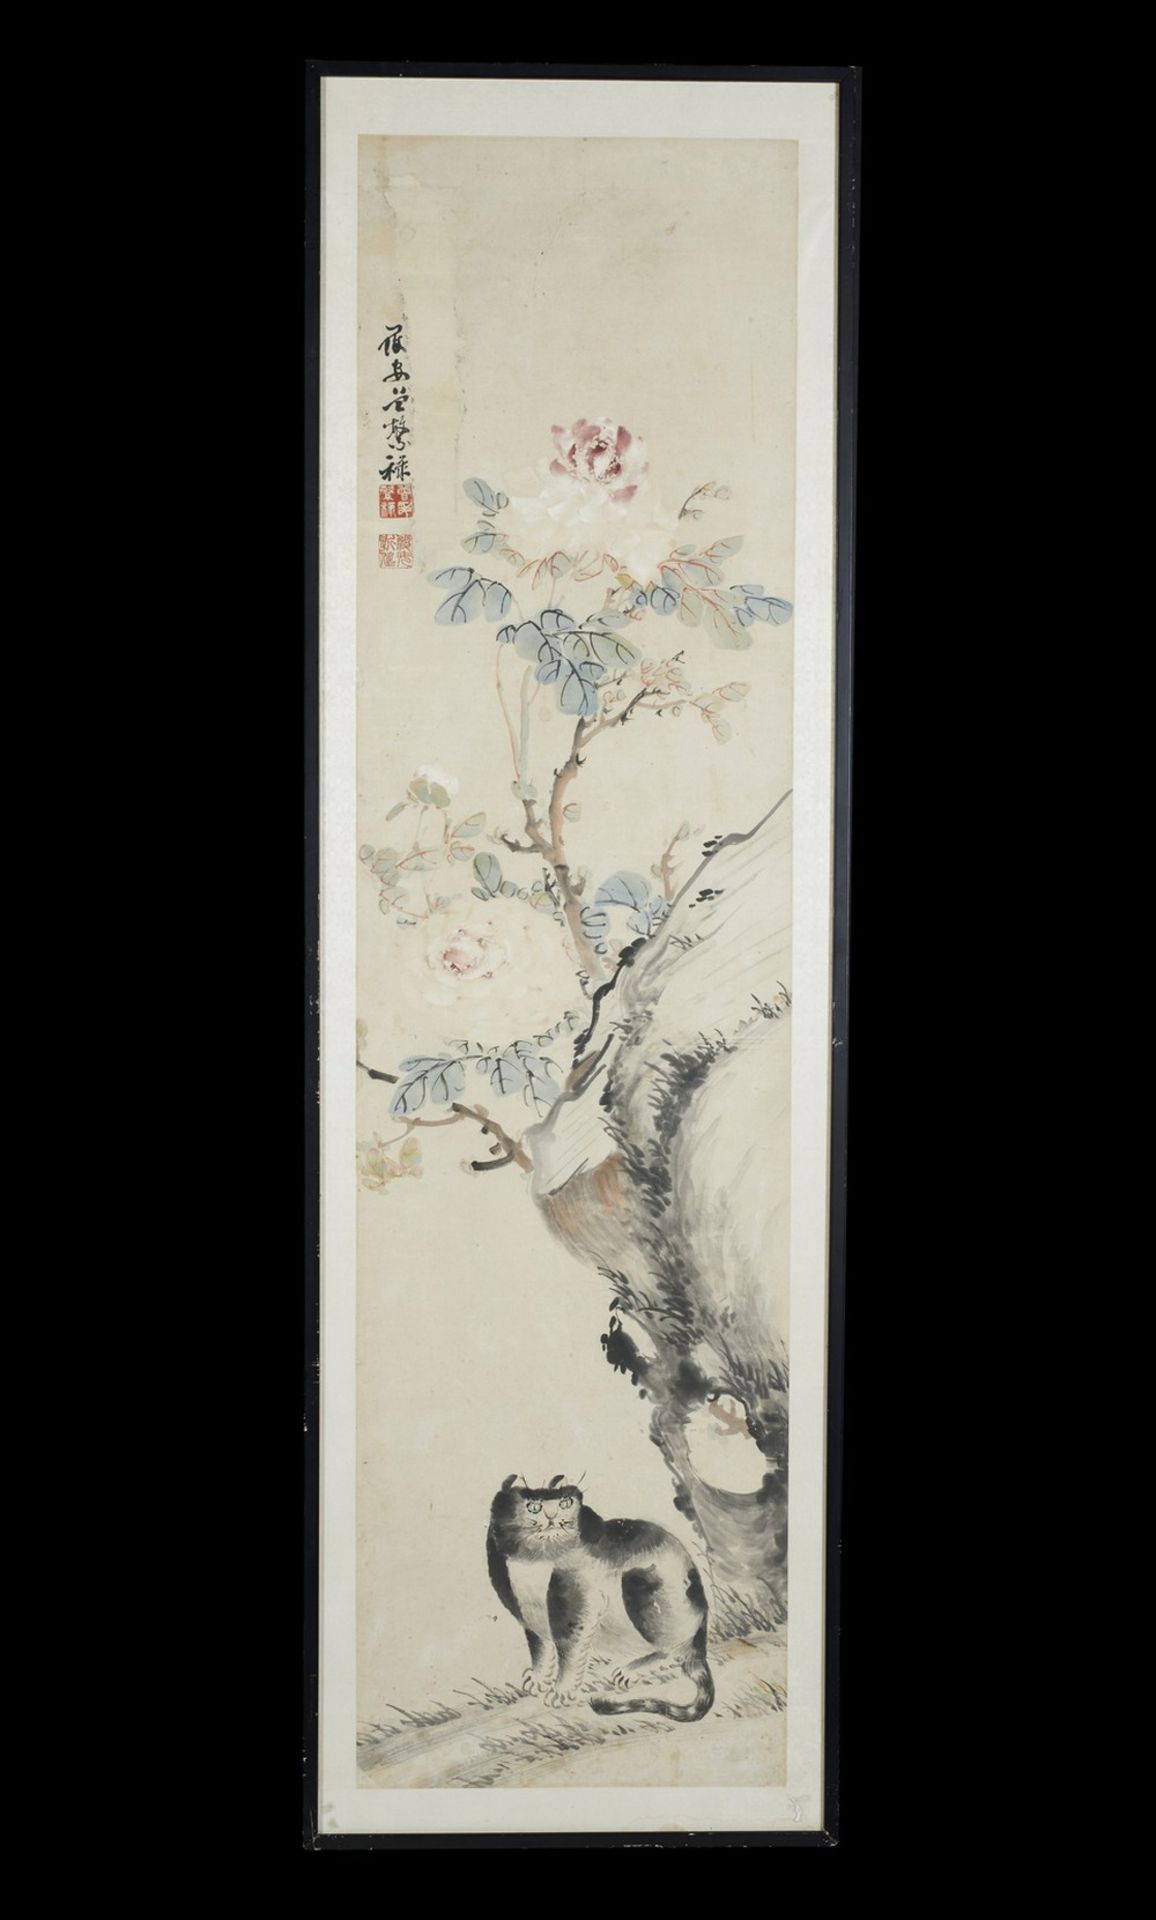 Arte coreana Hanging scroll representing the auspicious pun-based subject of the cat, rock and peo - Image 2 of 2